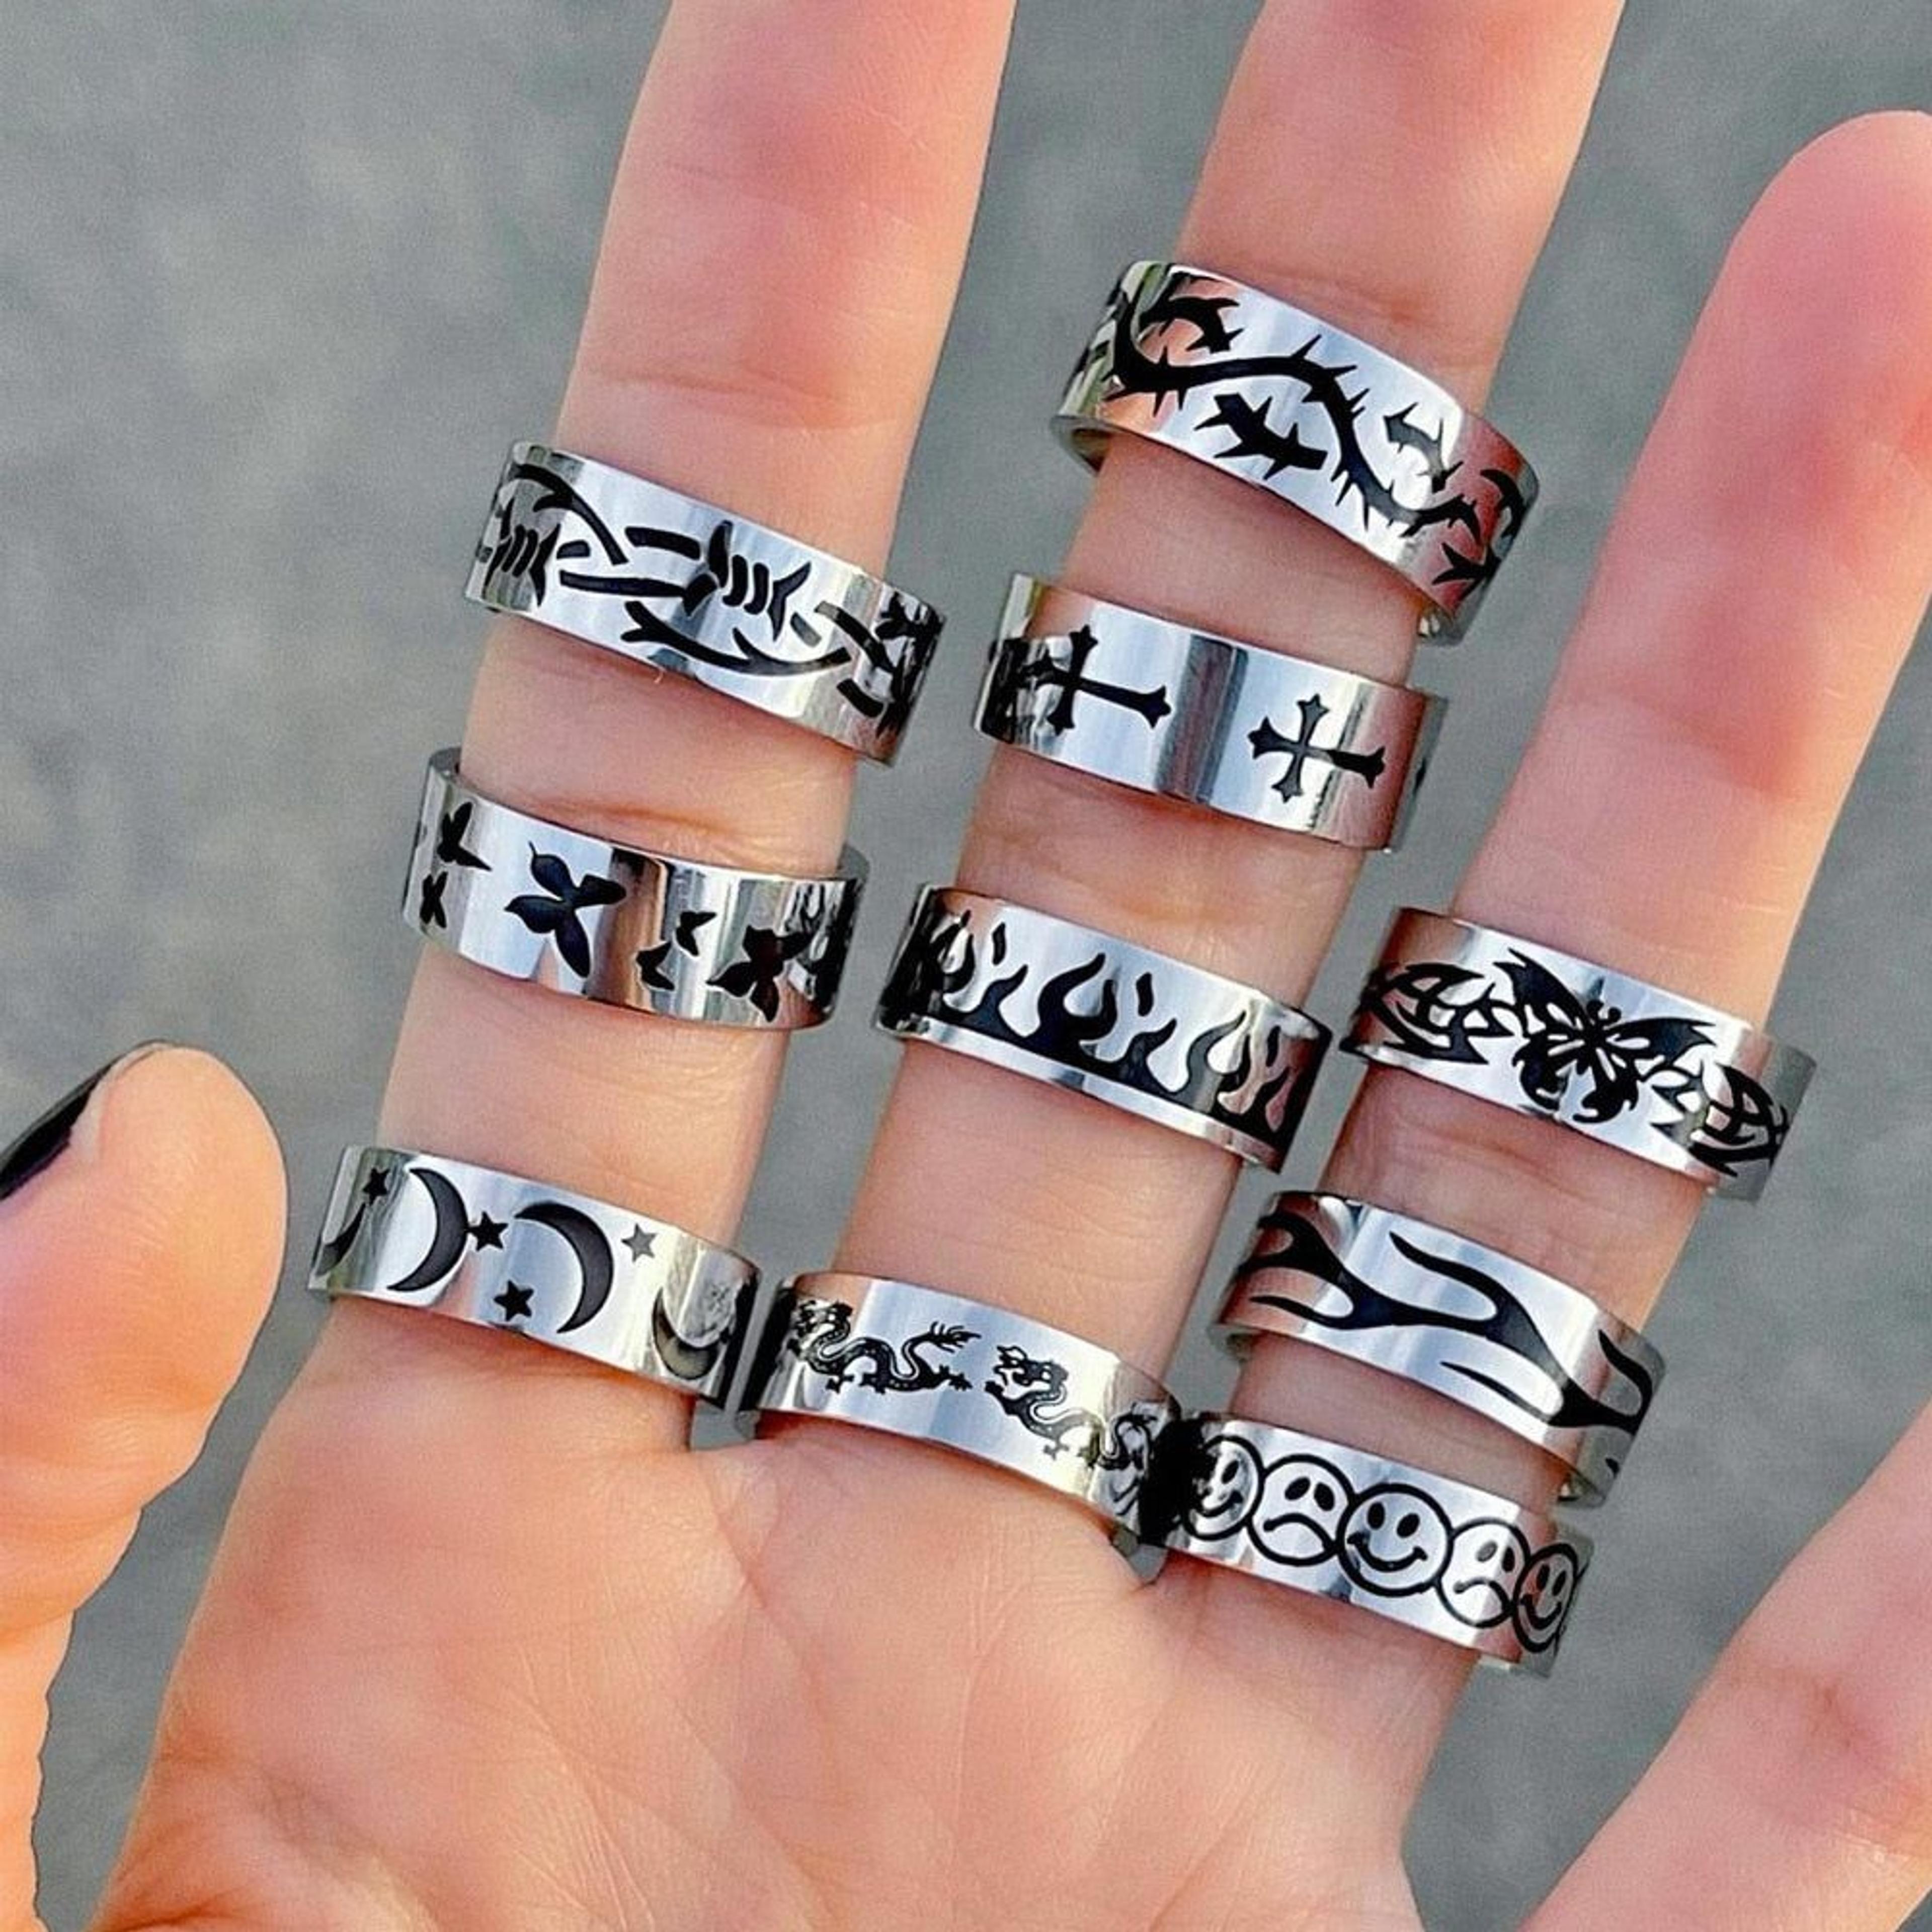 New Fashion Hiphop Punk Stainless Steel Fire Butterfly Band Rings Vintage Goth Rings for Women Men Jewelry Gift - 8 / D strip